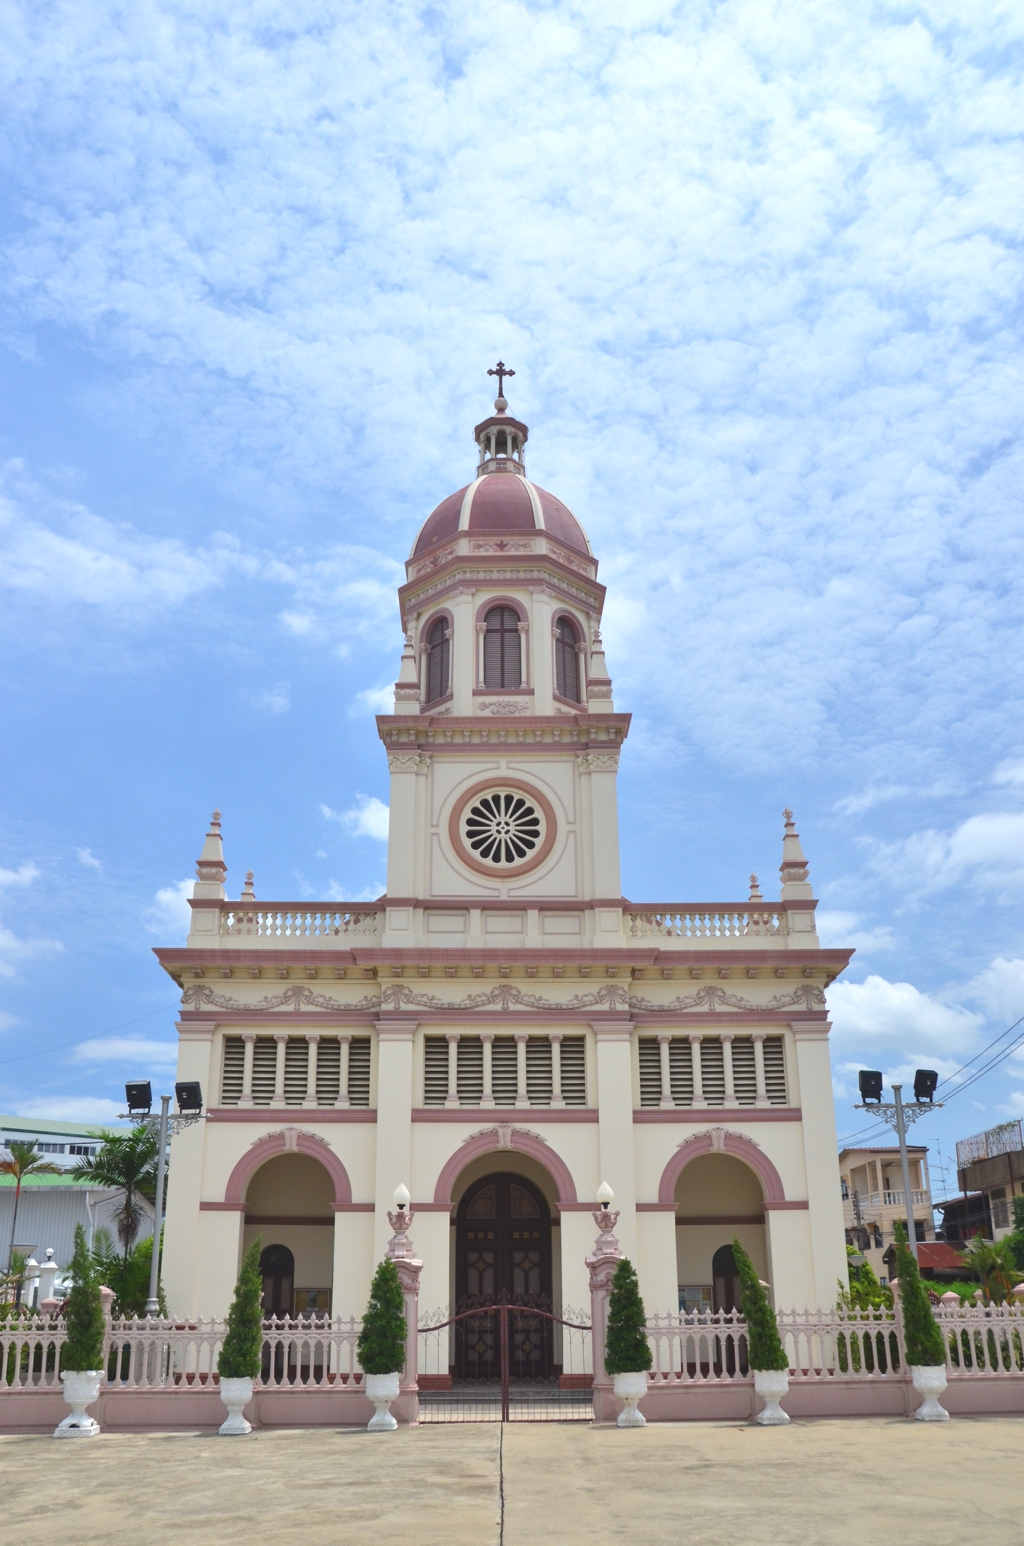 Santa Cruz Church, which was built by Portuguese Catholics during the late 18th century, seems slightly out of place on Bangkok's west bank